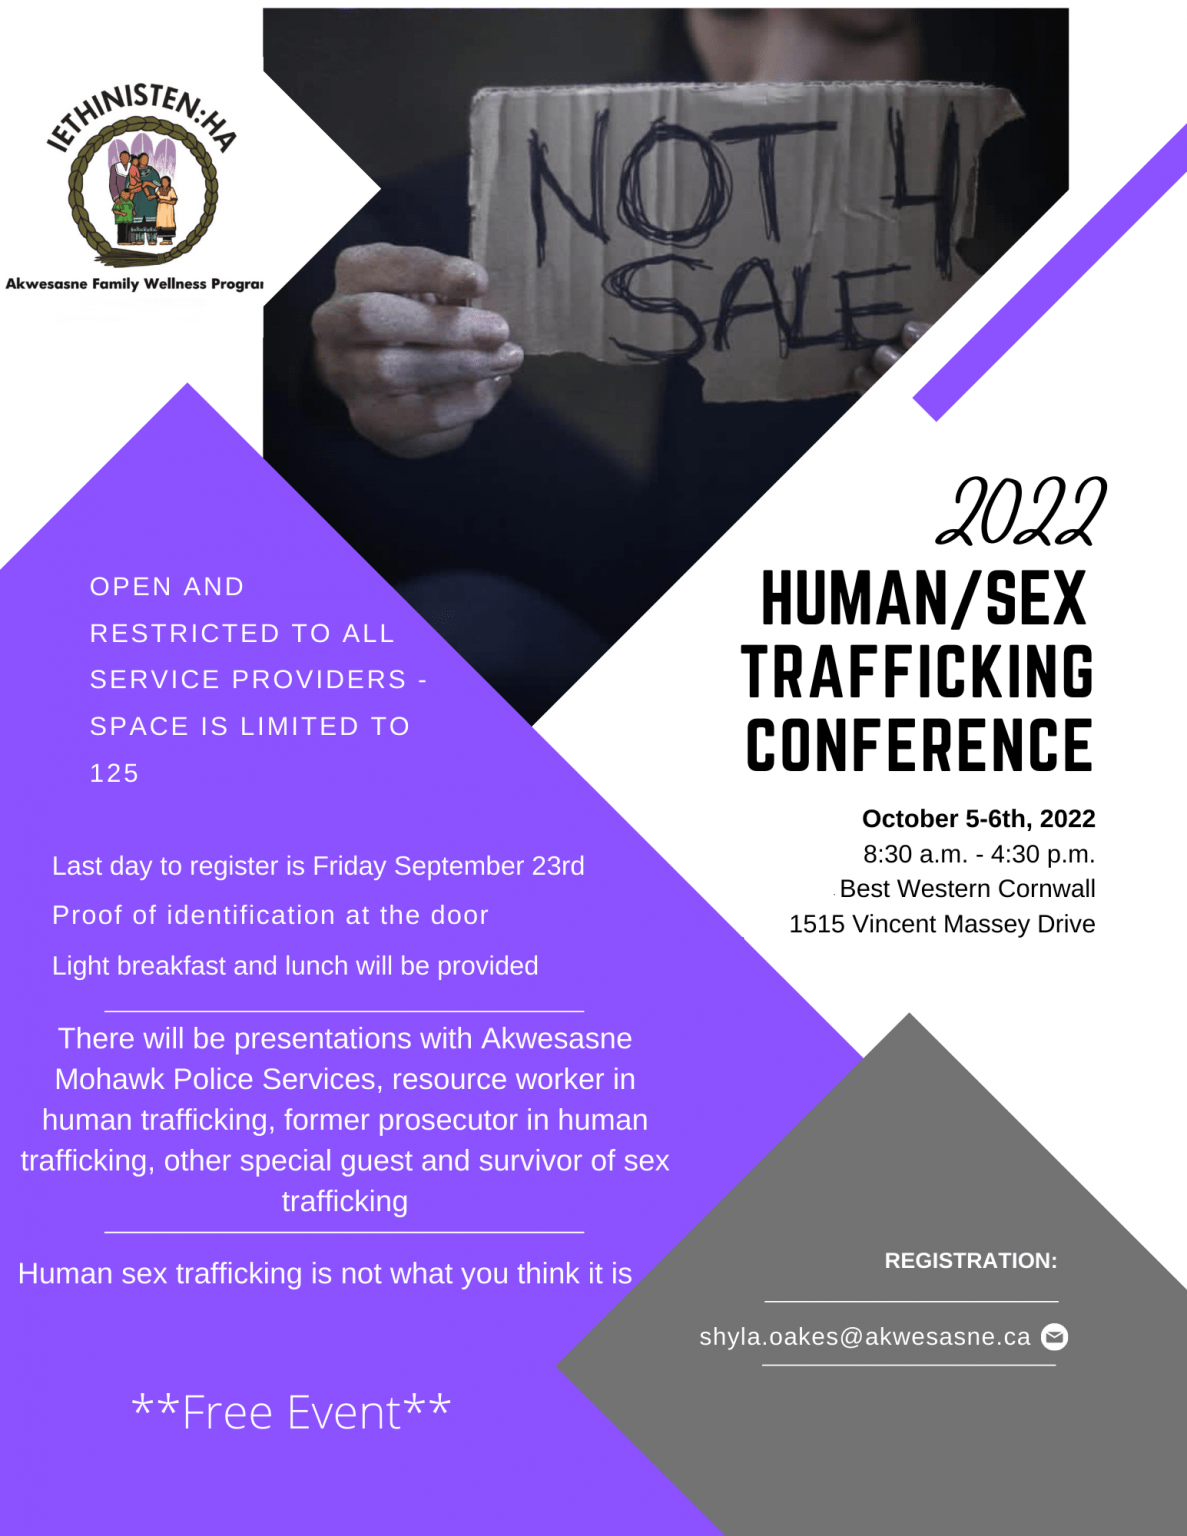 AFWP HUMAN/SEX TRAFFICKING CONFERENCE Mohawk Council of Akwesasne